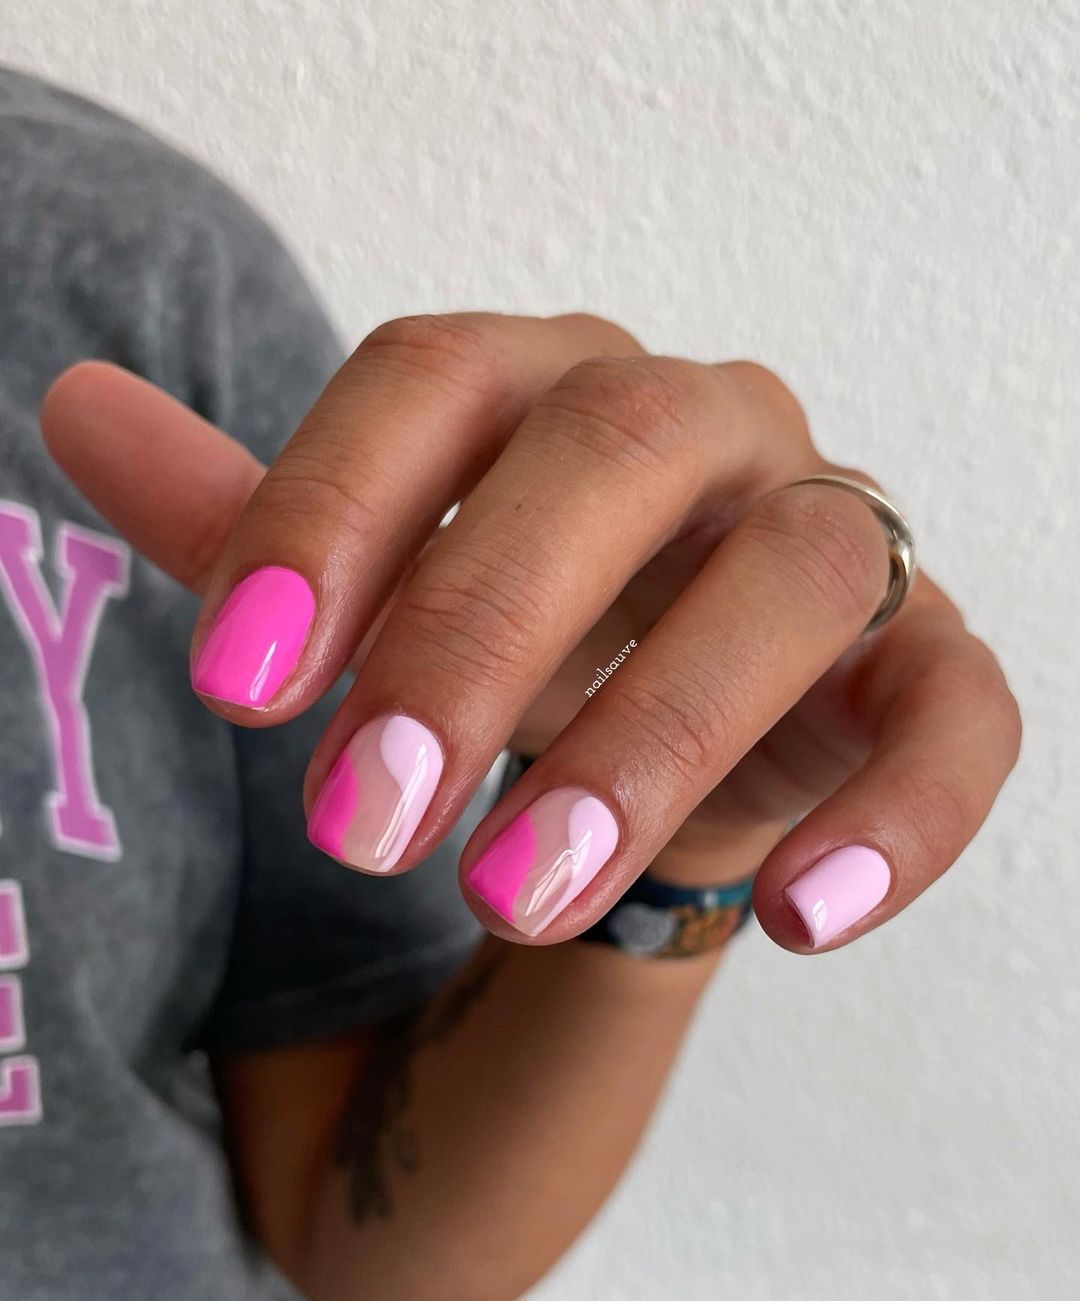 Short Pink Nails with Light and Dark Pink Design